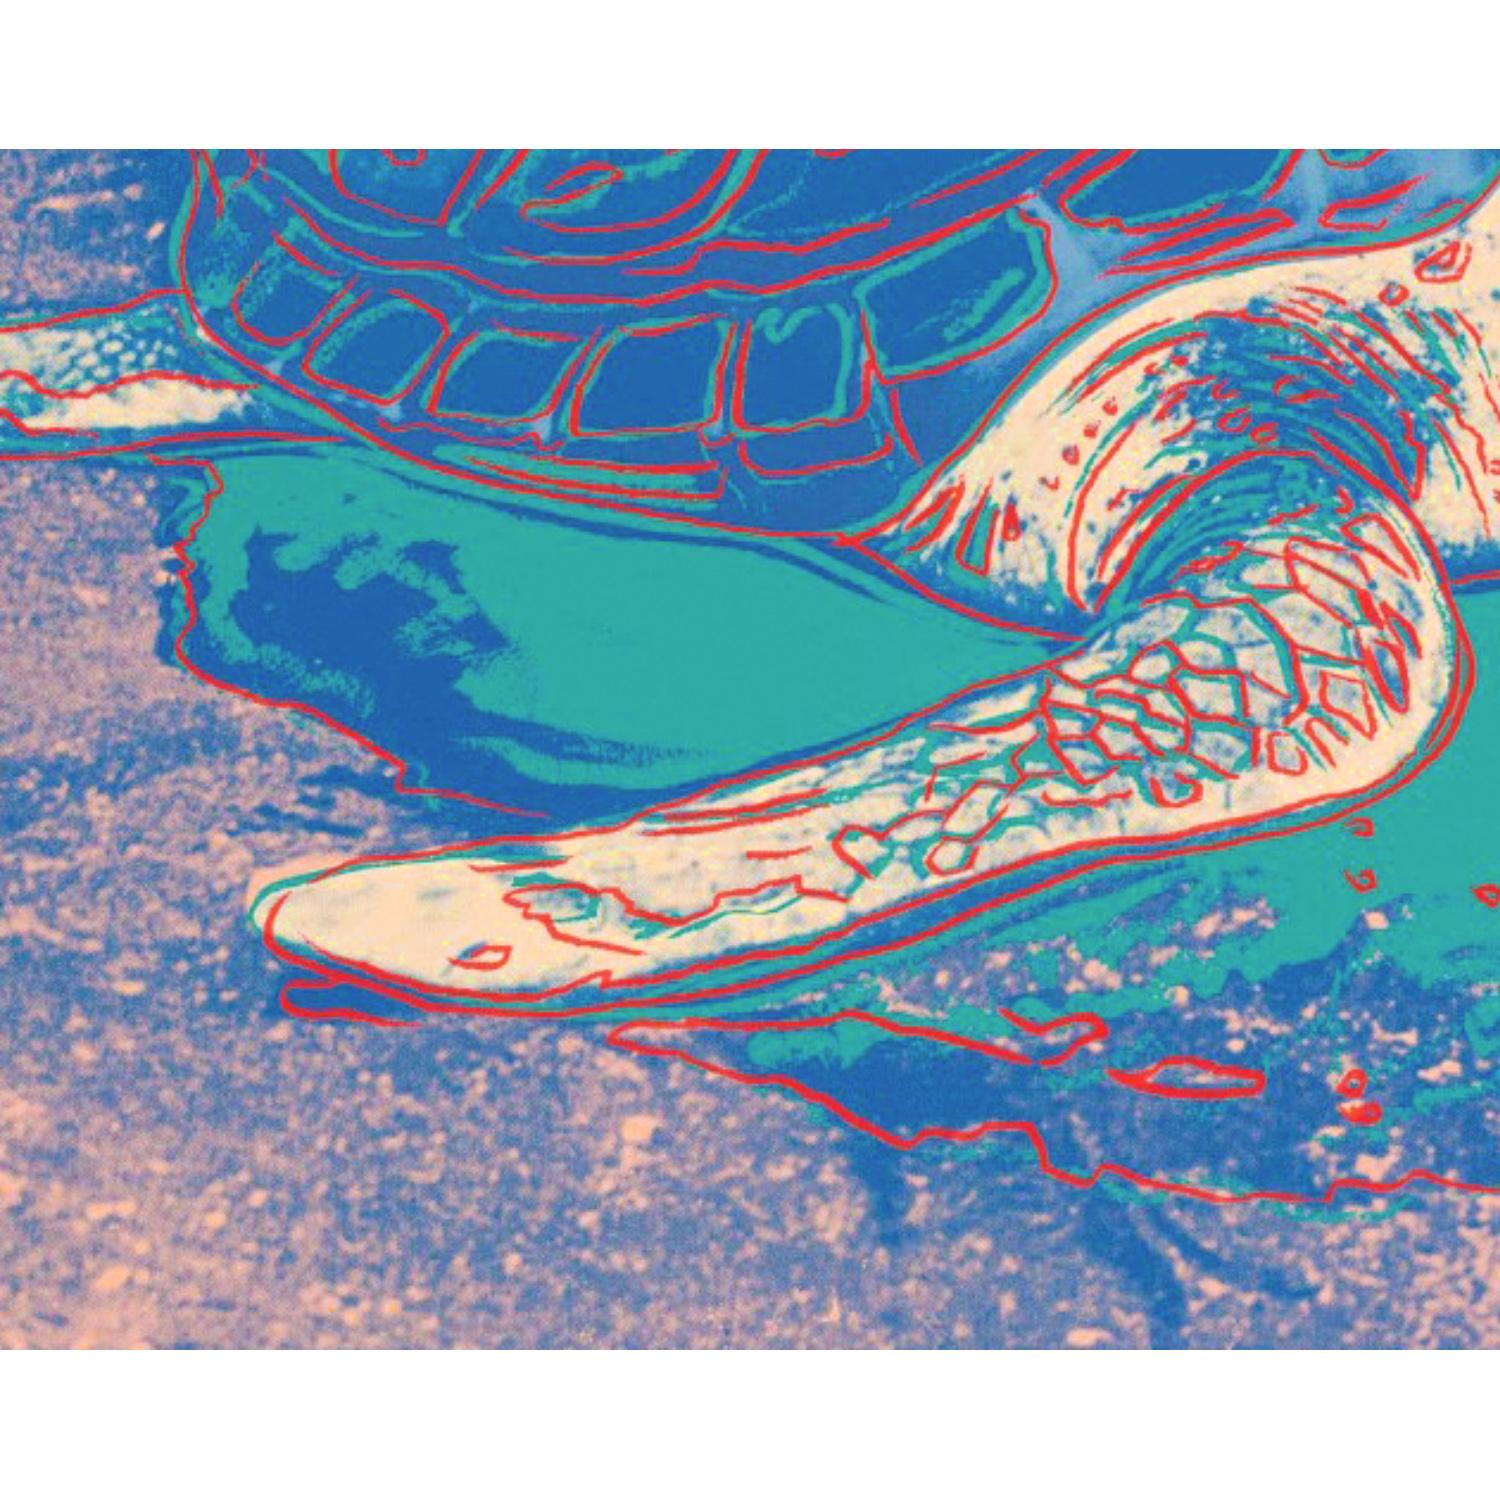 American Andy Warhol Turtle 1985 'FS II.360A', Signed and Numbered